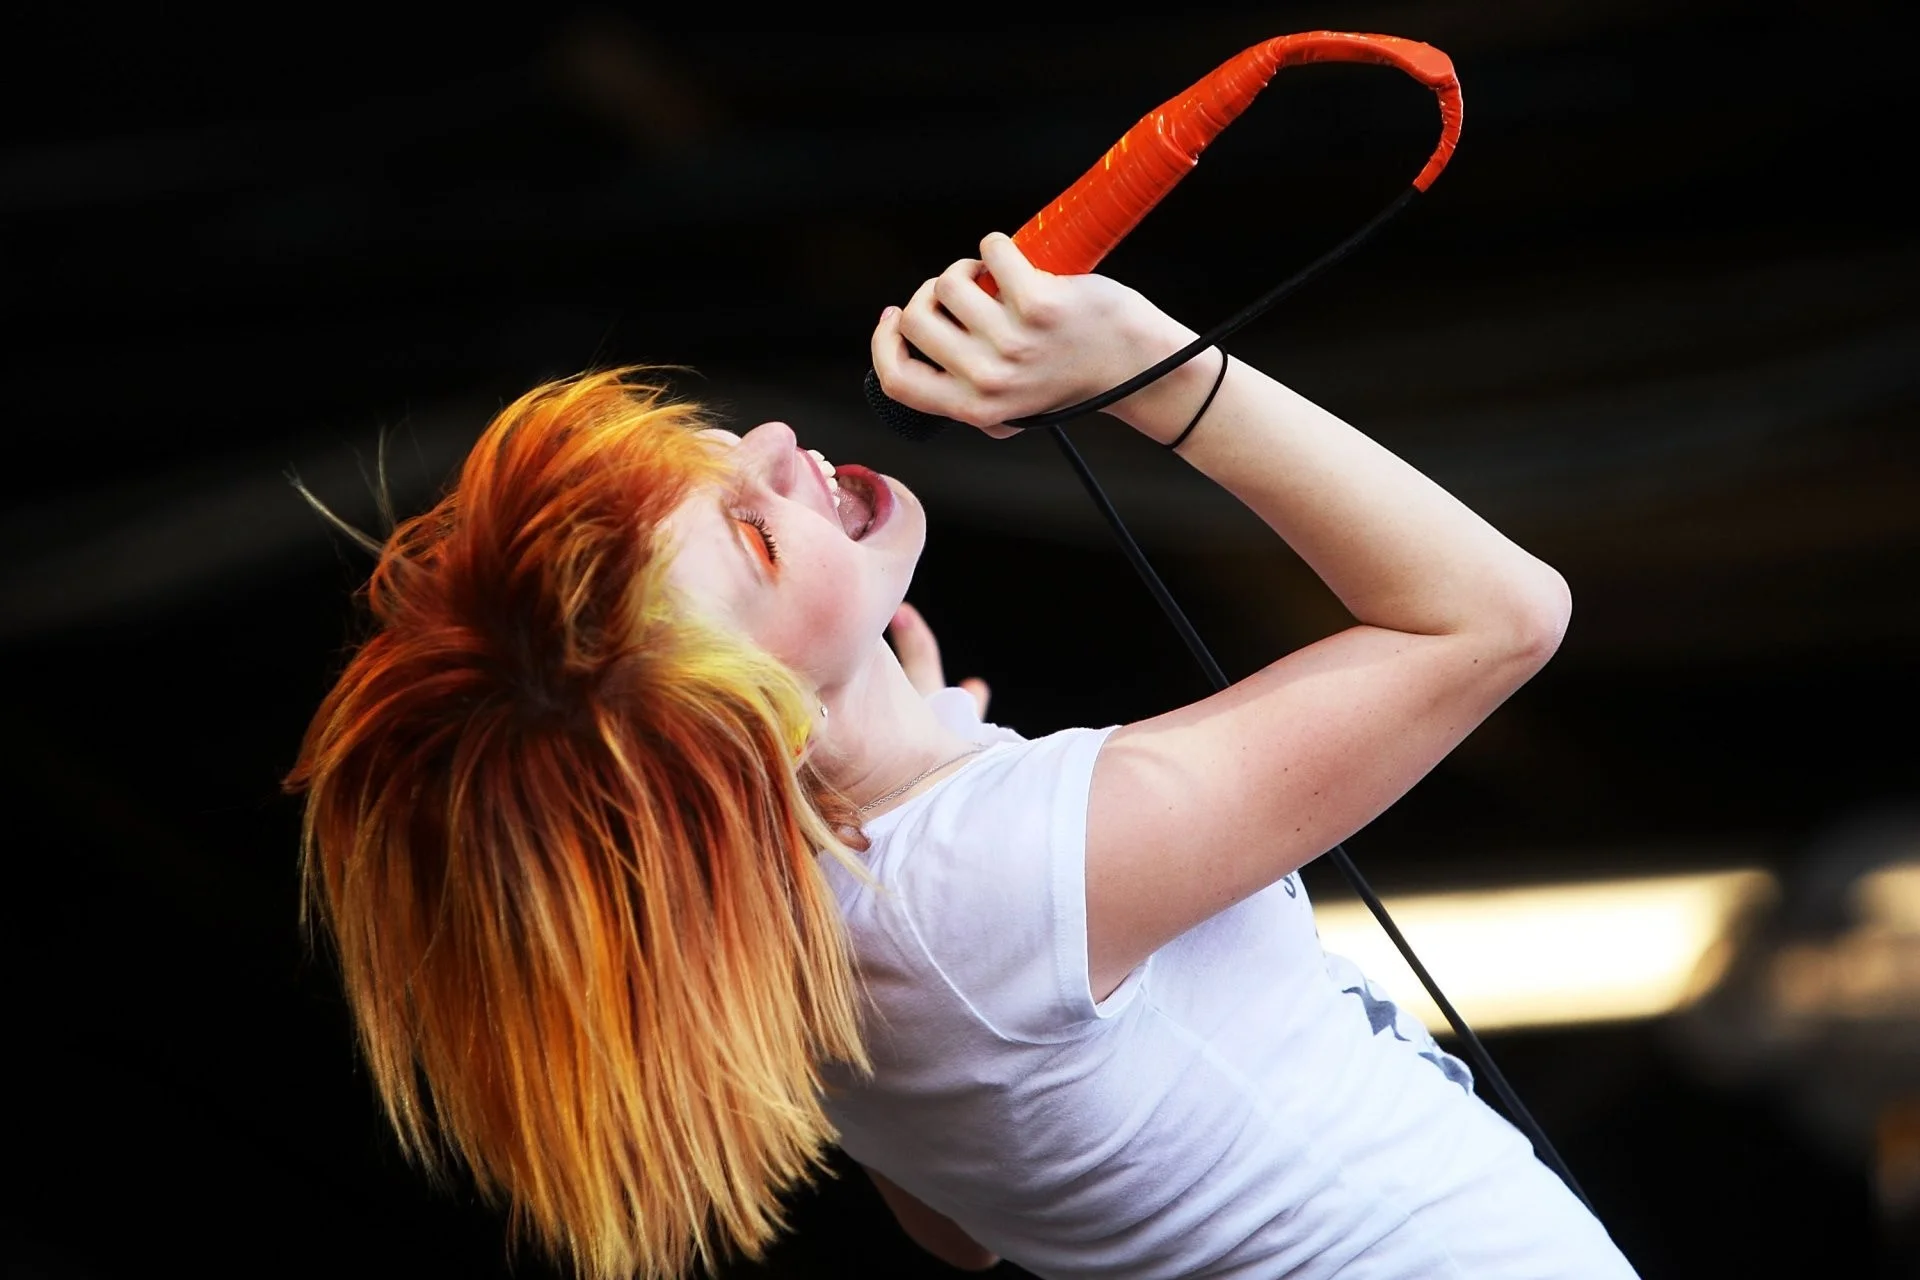 Hayley williams paramore pop punk haley williams concerto girl singer red microphone